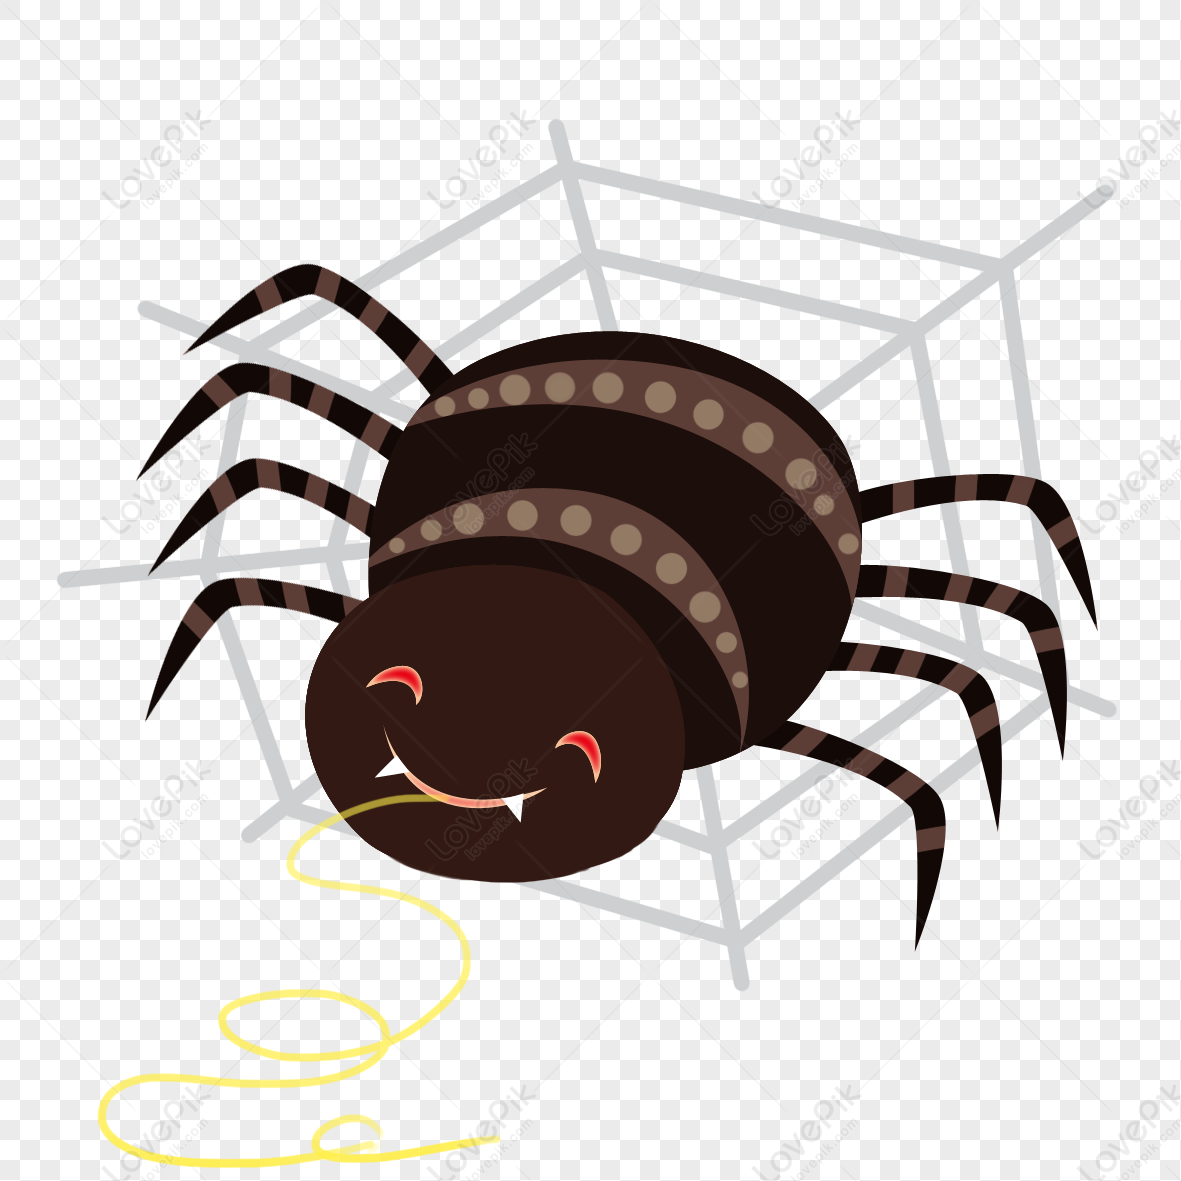 Cartoon Spider PNG Transparent And Clipart Image For Free Download -  Lovepik | 400680186